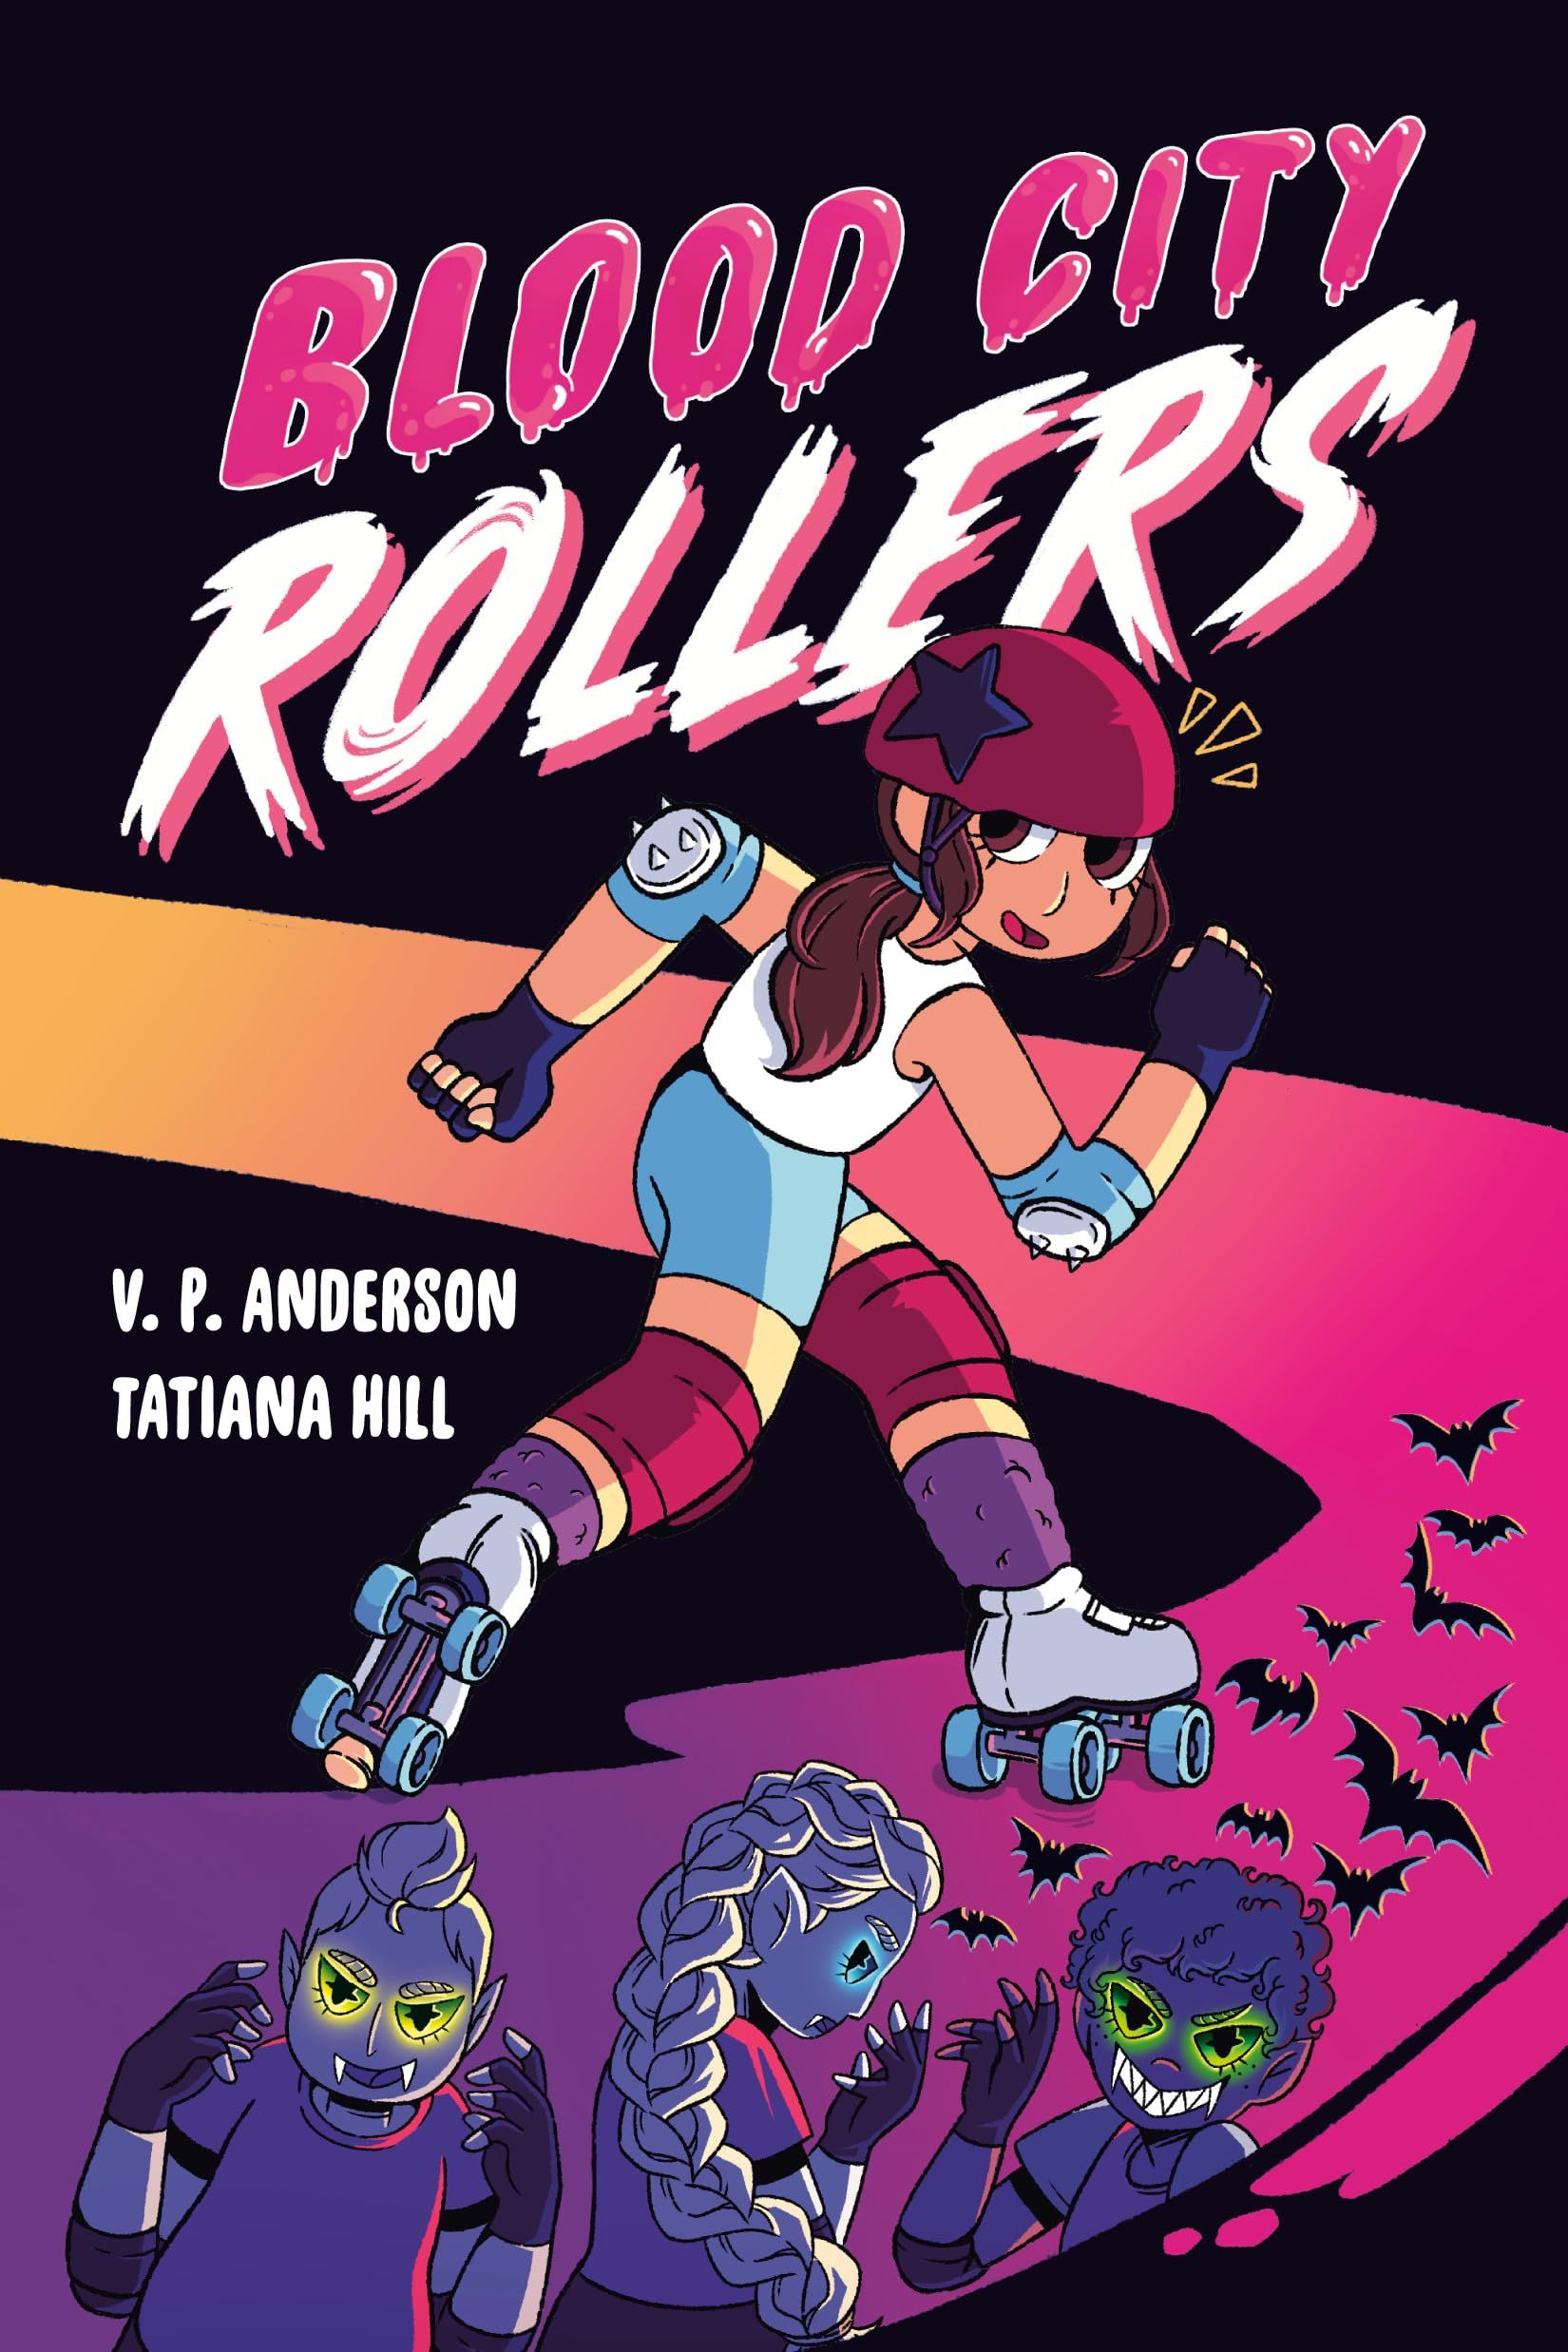 Blood City Rollers comic cover